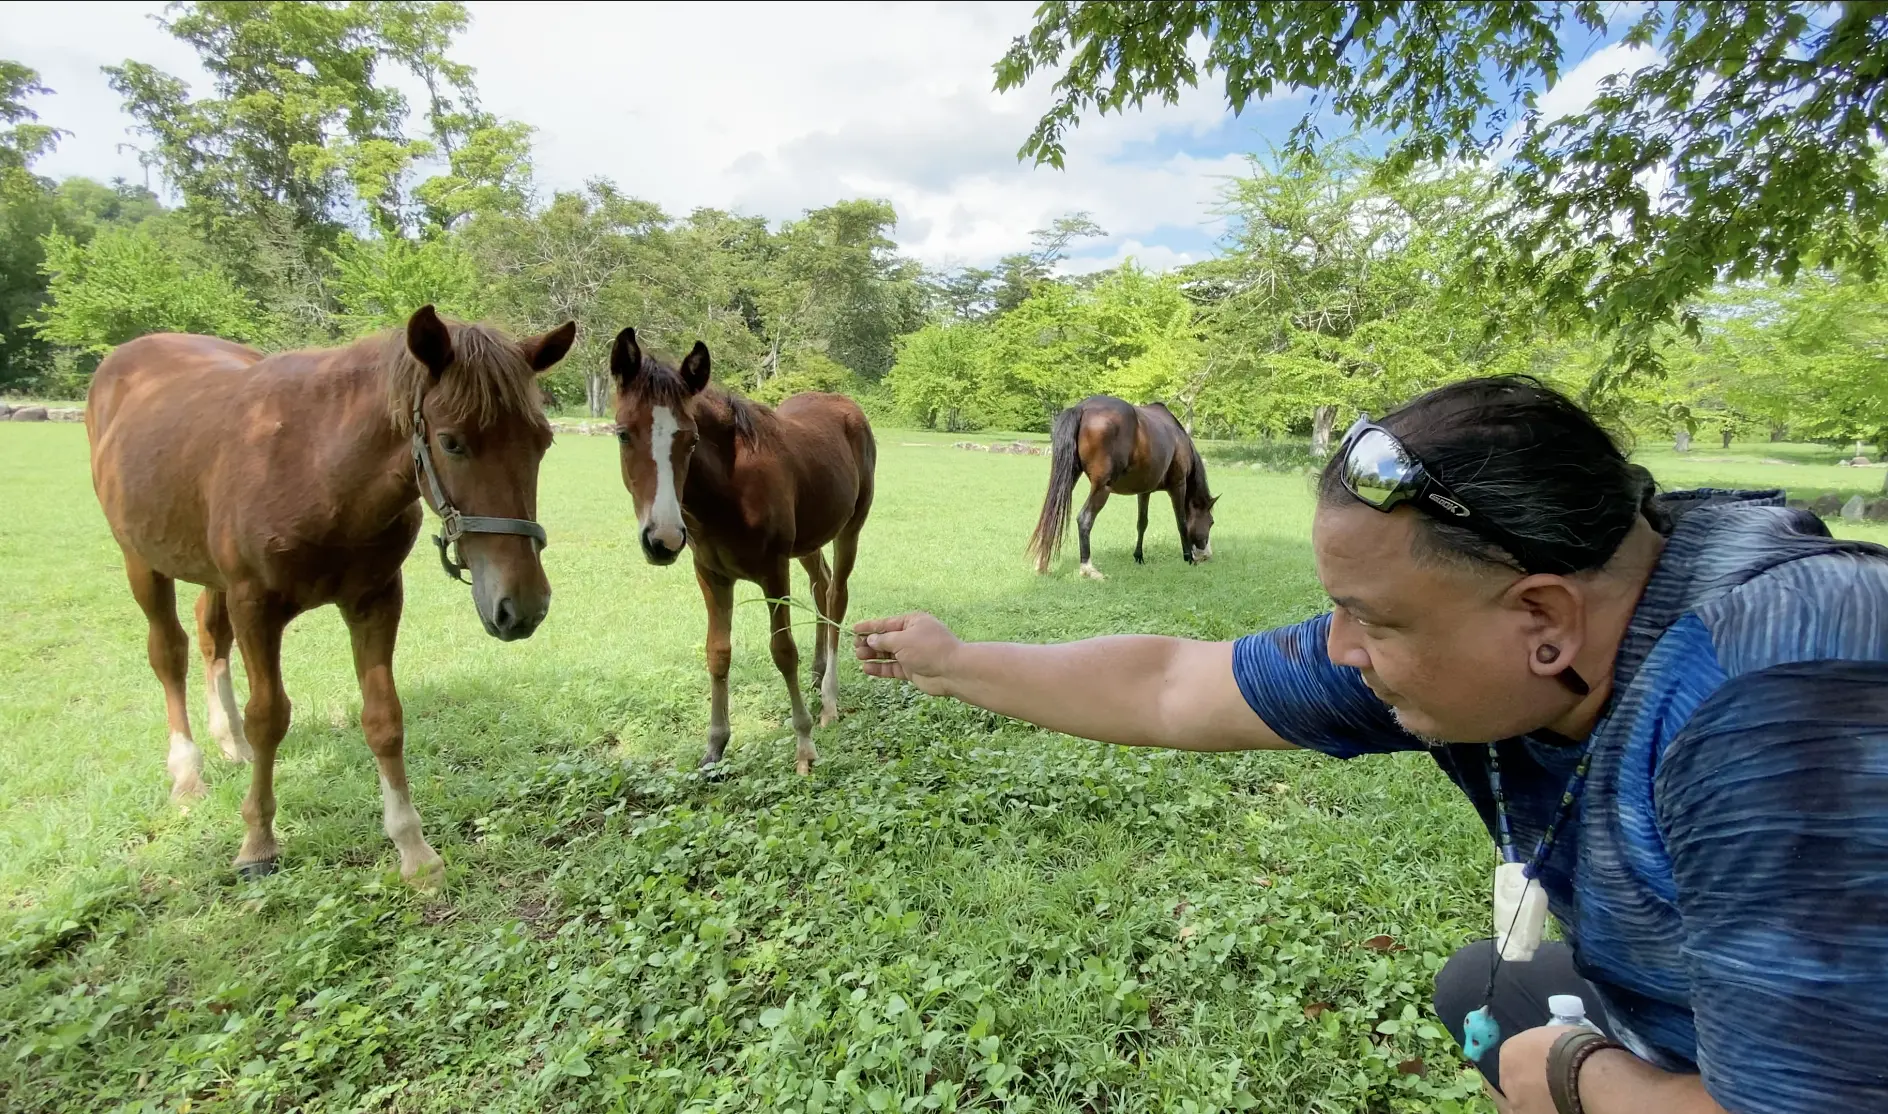 Po Araní, a Taíno educator, artisan, and traditional medicine practitioner offers grass to the horses